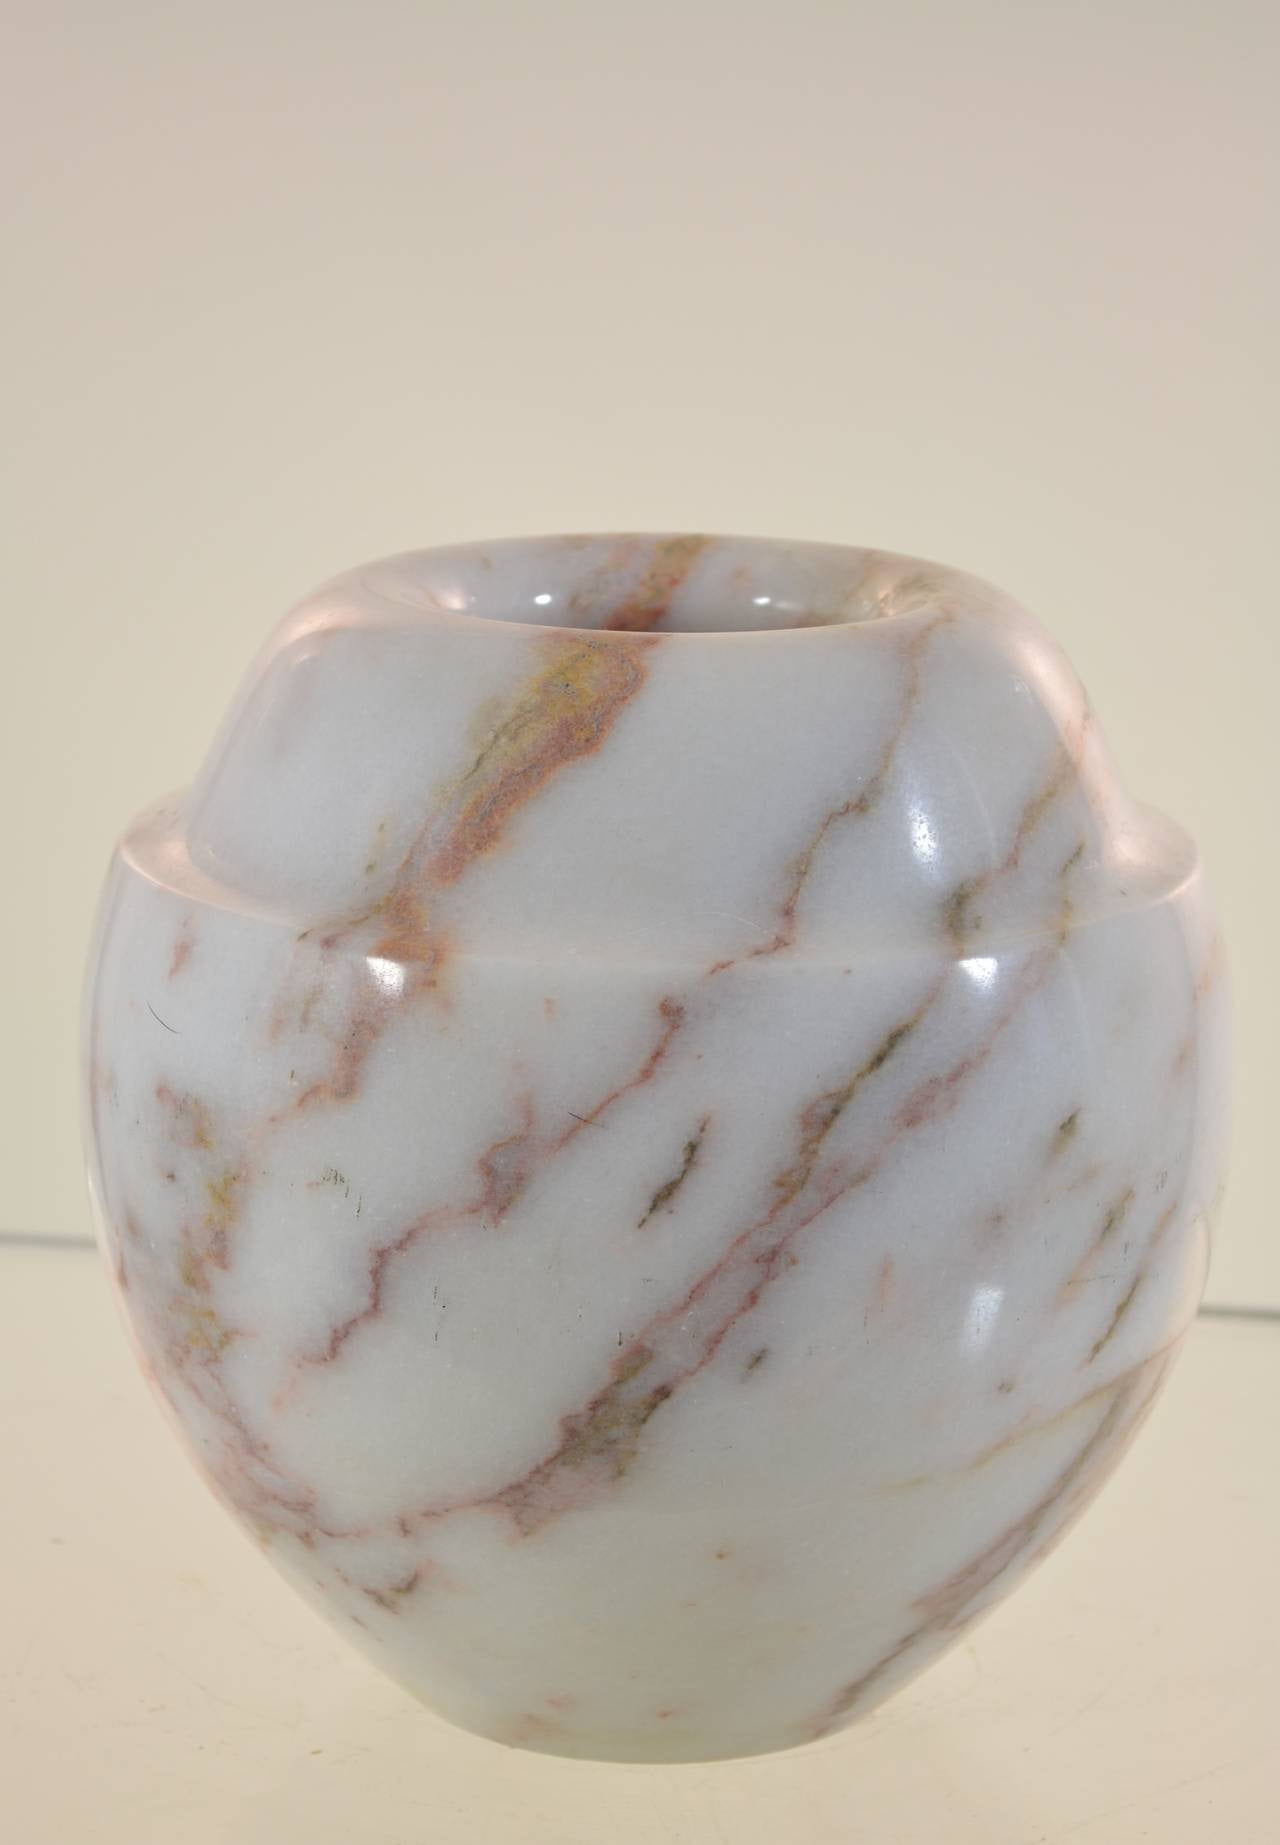 Heavy, elegant vase or small planter in carved marble with polished finish.